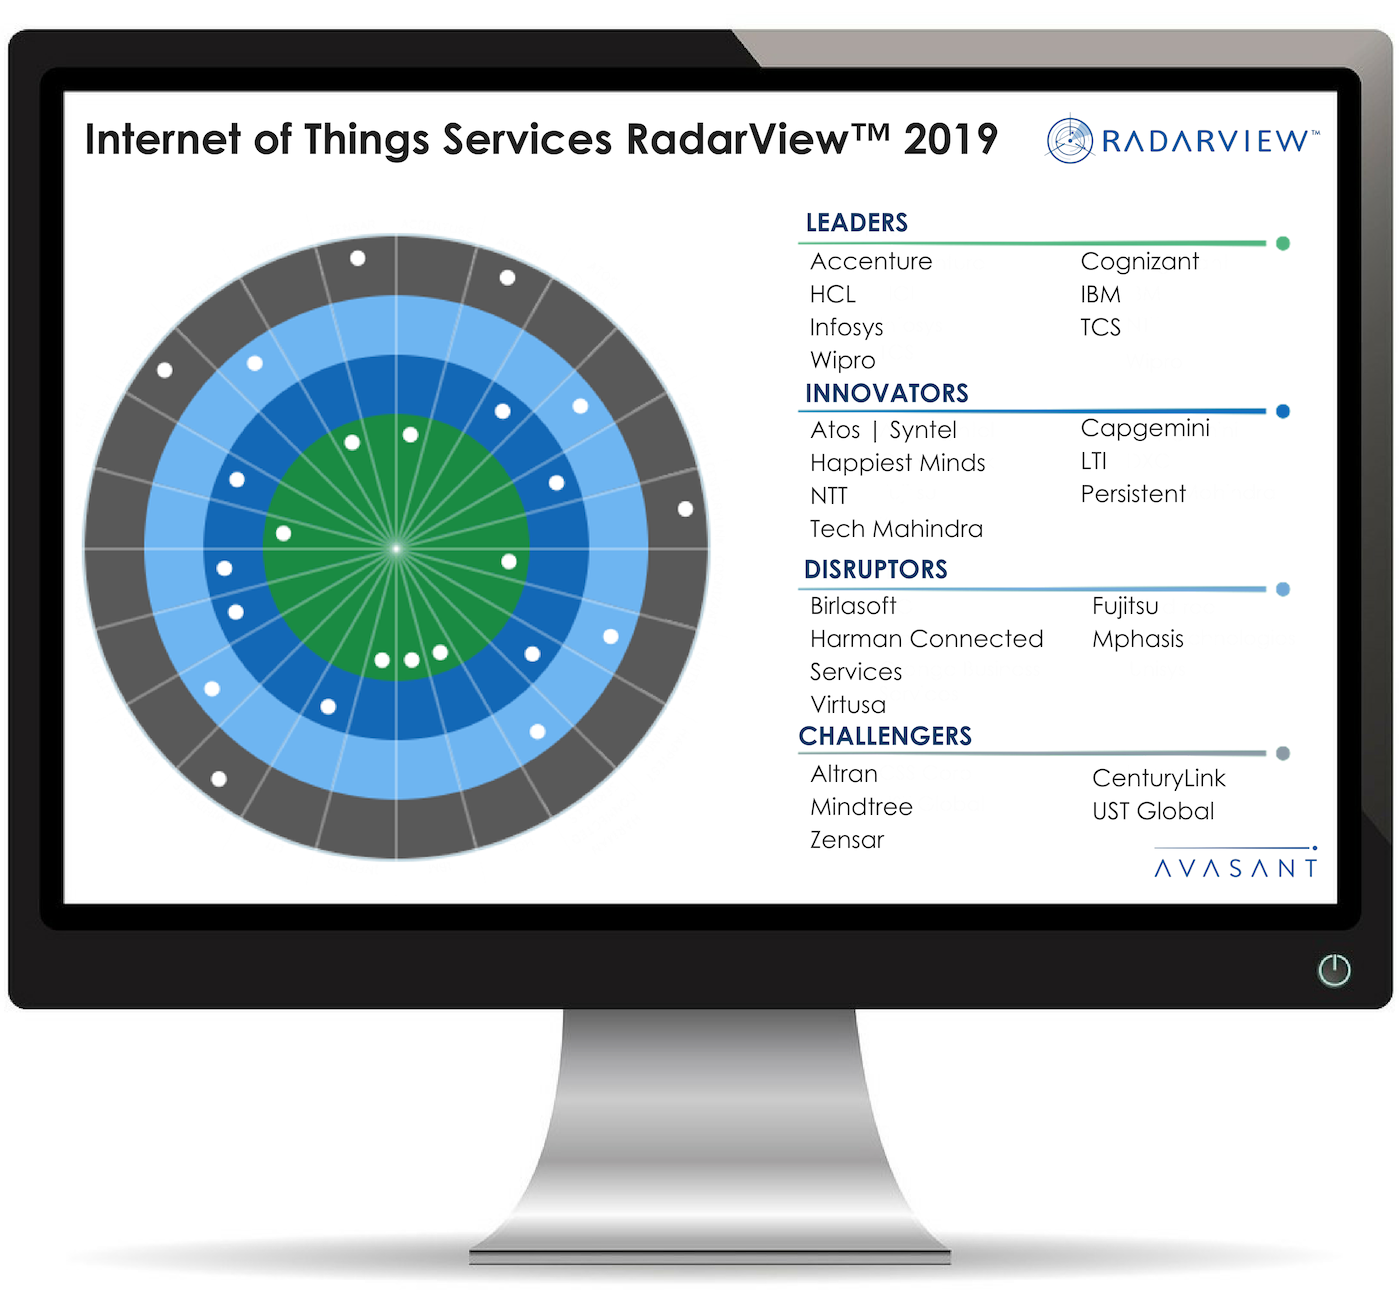 IoT Graphic Updated for provider profiles 1 - Internet of Things 2019 IBM RadarView™ Profile